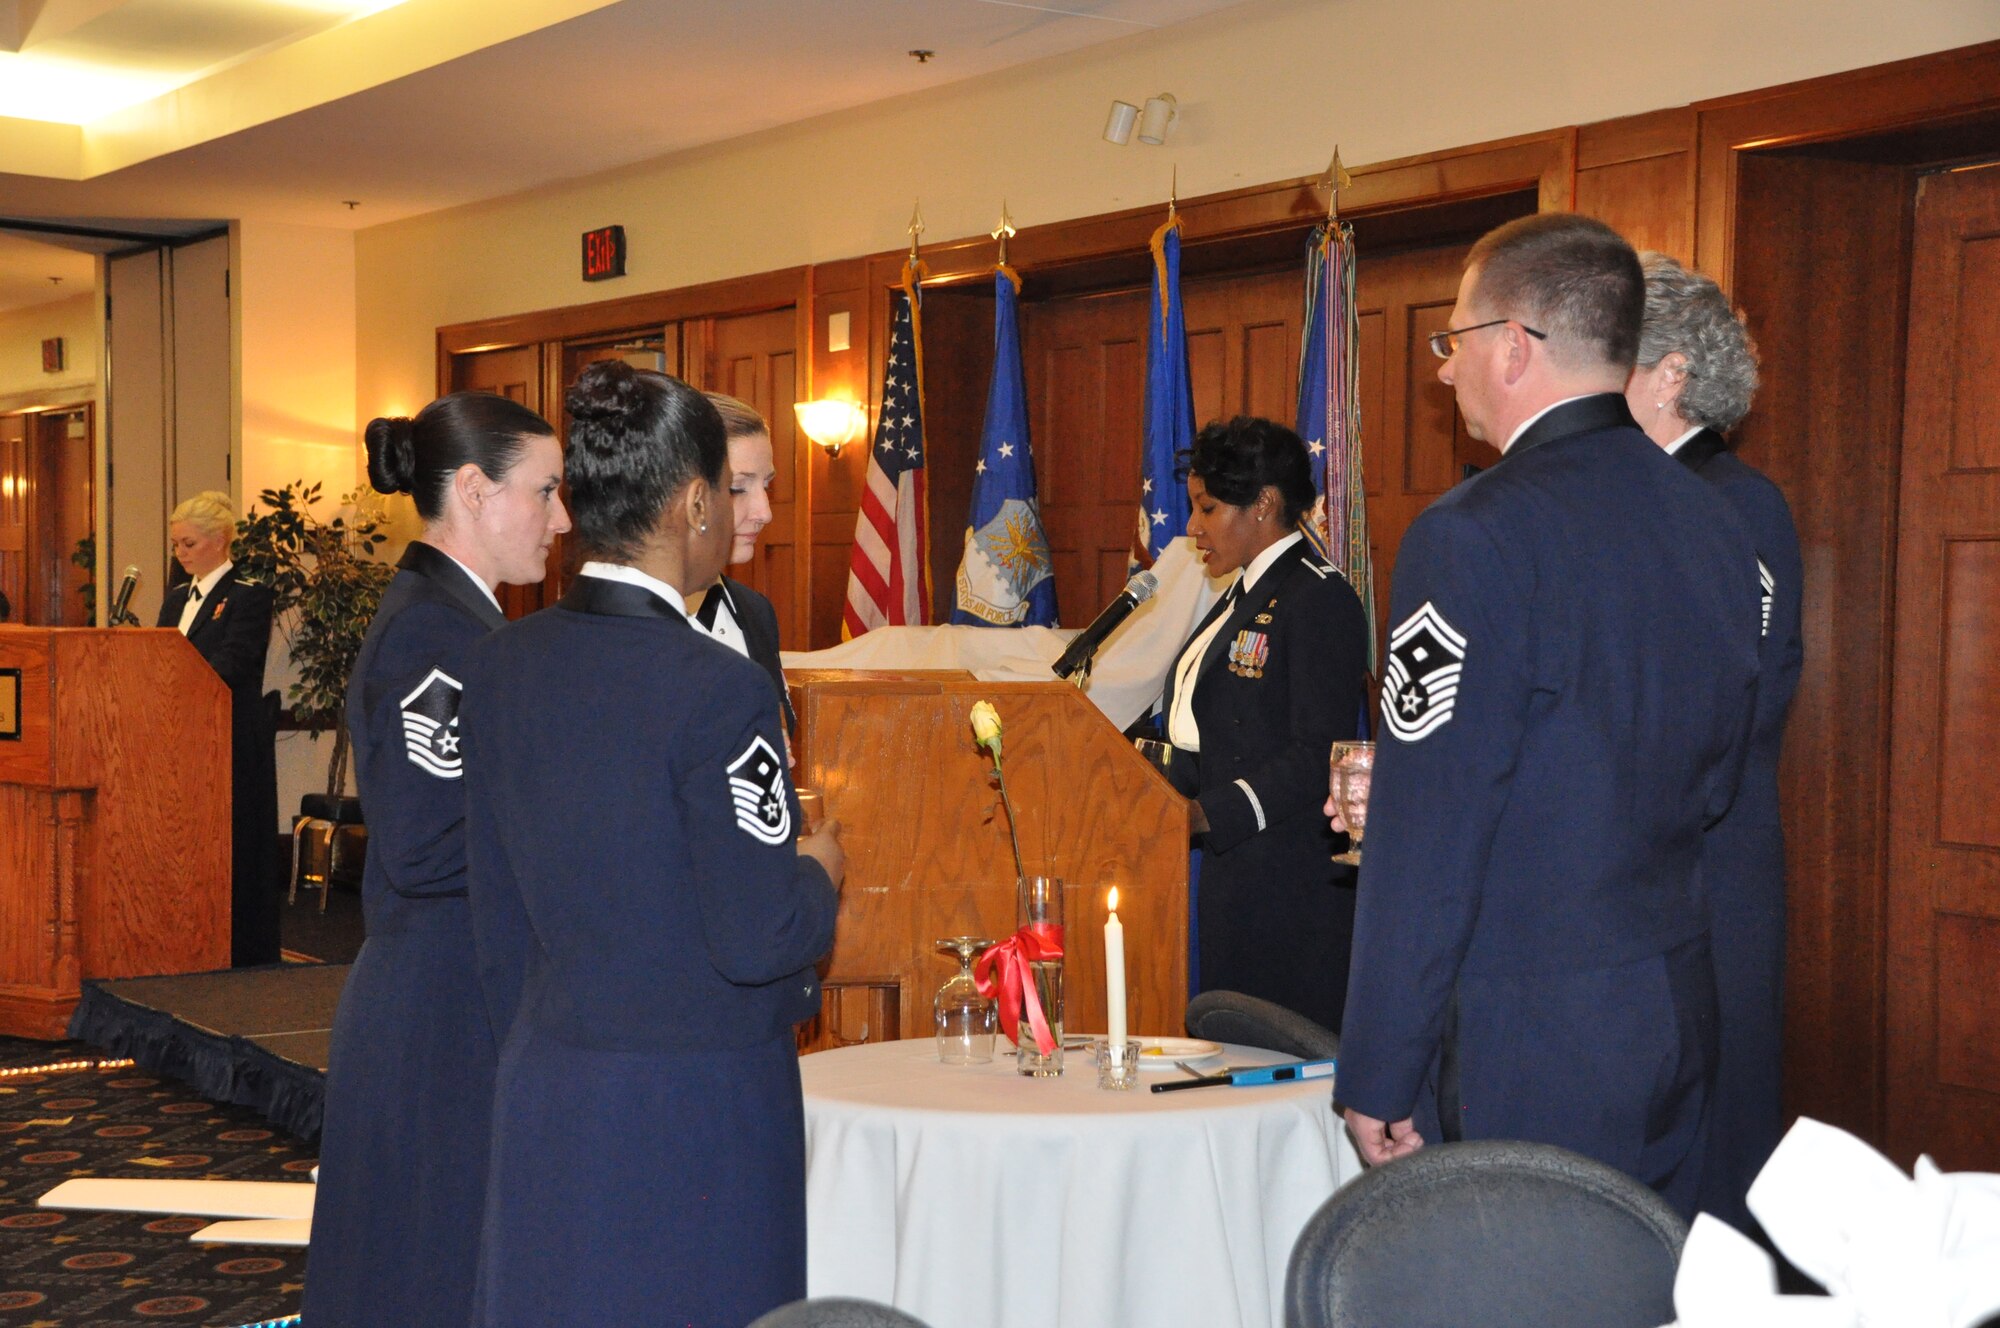 First Sergeants from the 459th Air Refueling Wing circle the ceremonial POW/MIA table to conduct the honors at the 459 ARW Annual Awards Banquet on Saturday, March 7, 2015. (Air Force Photo / SrA Kristin Kurtz)